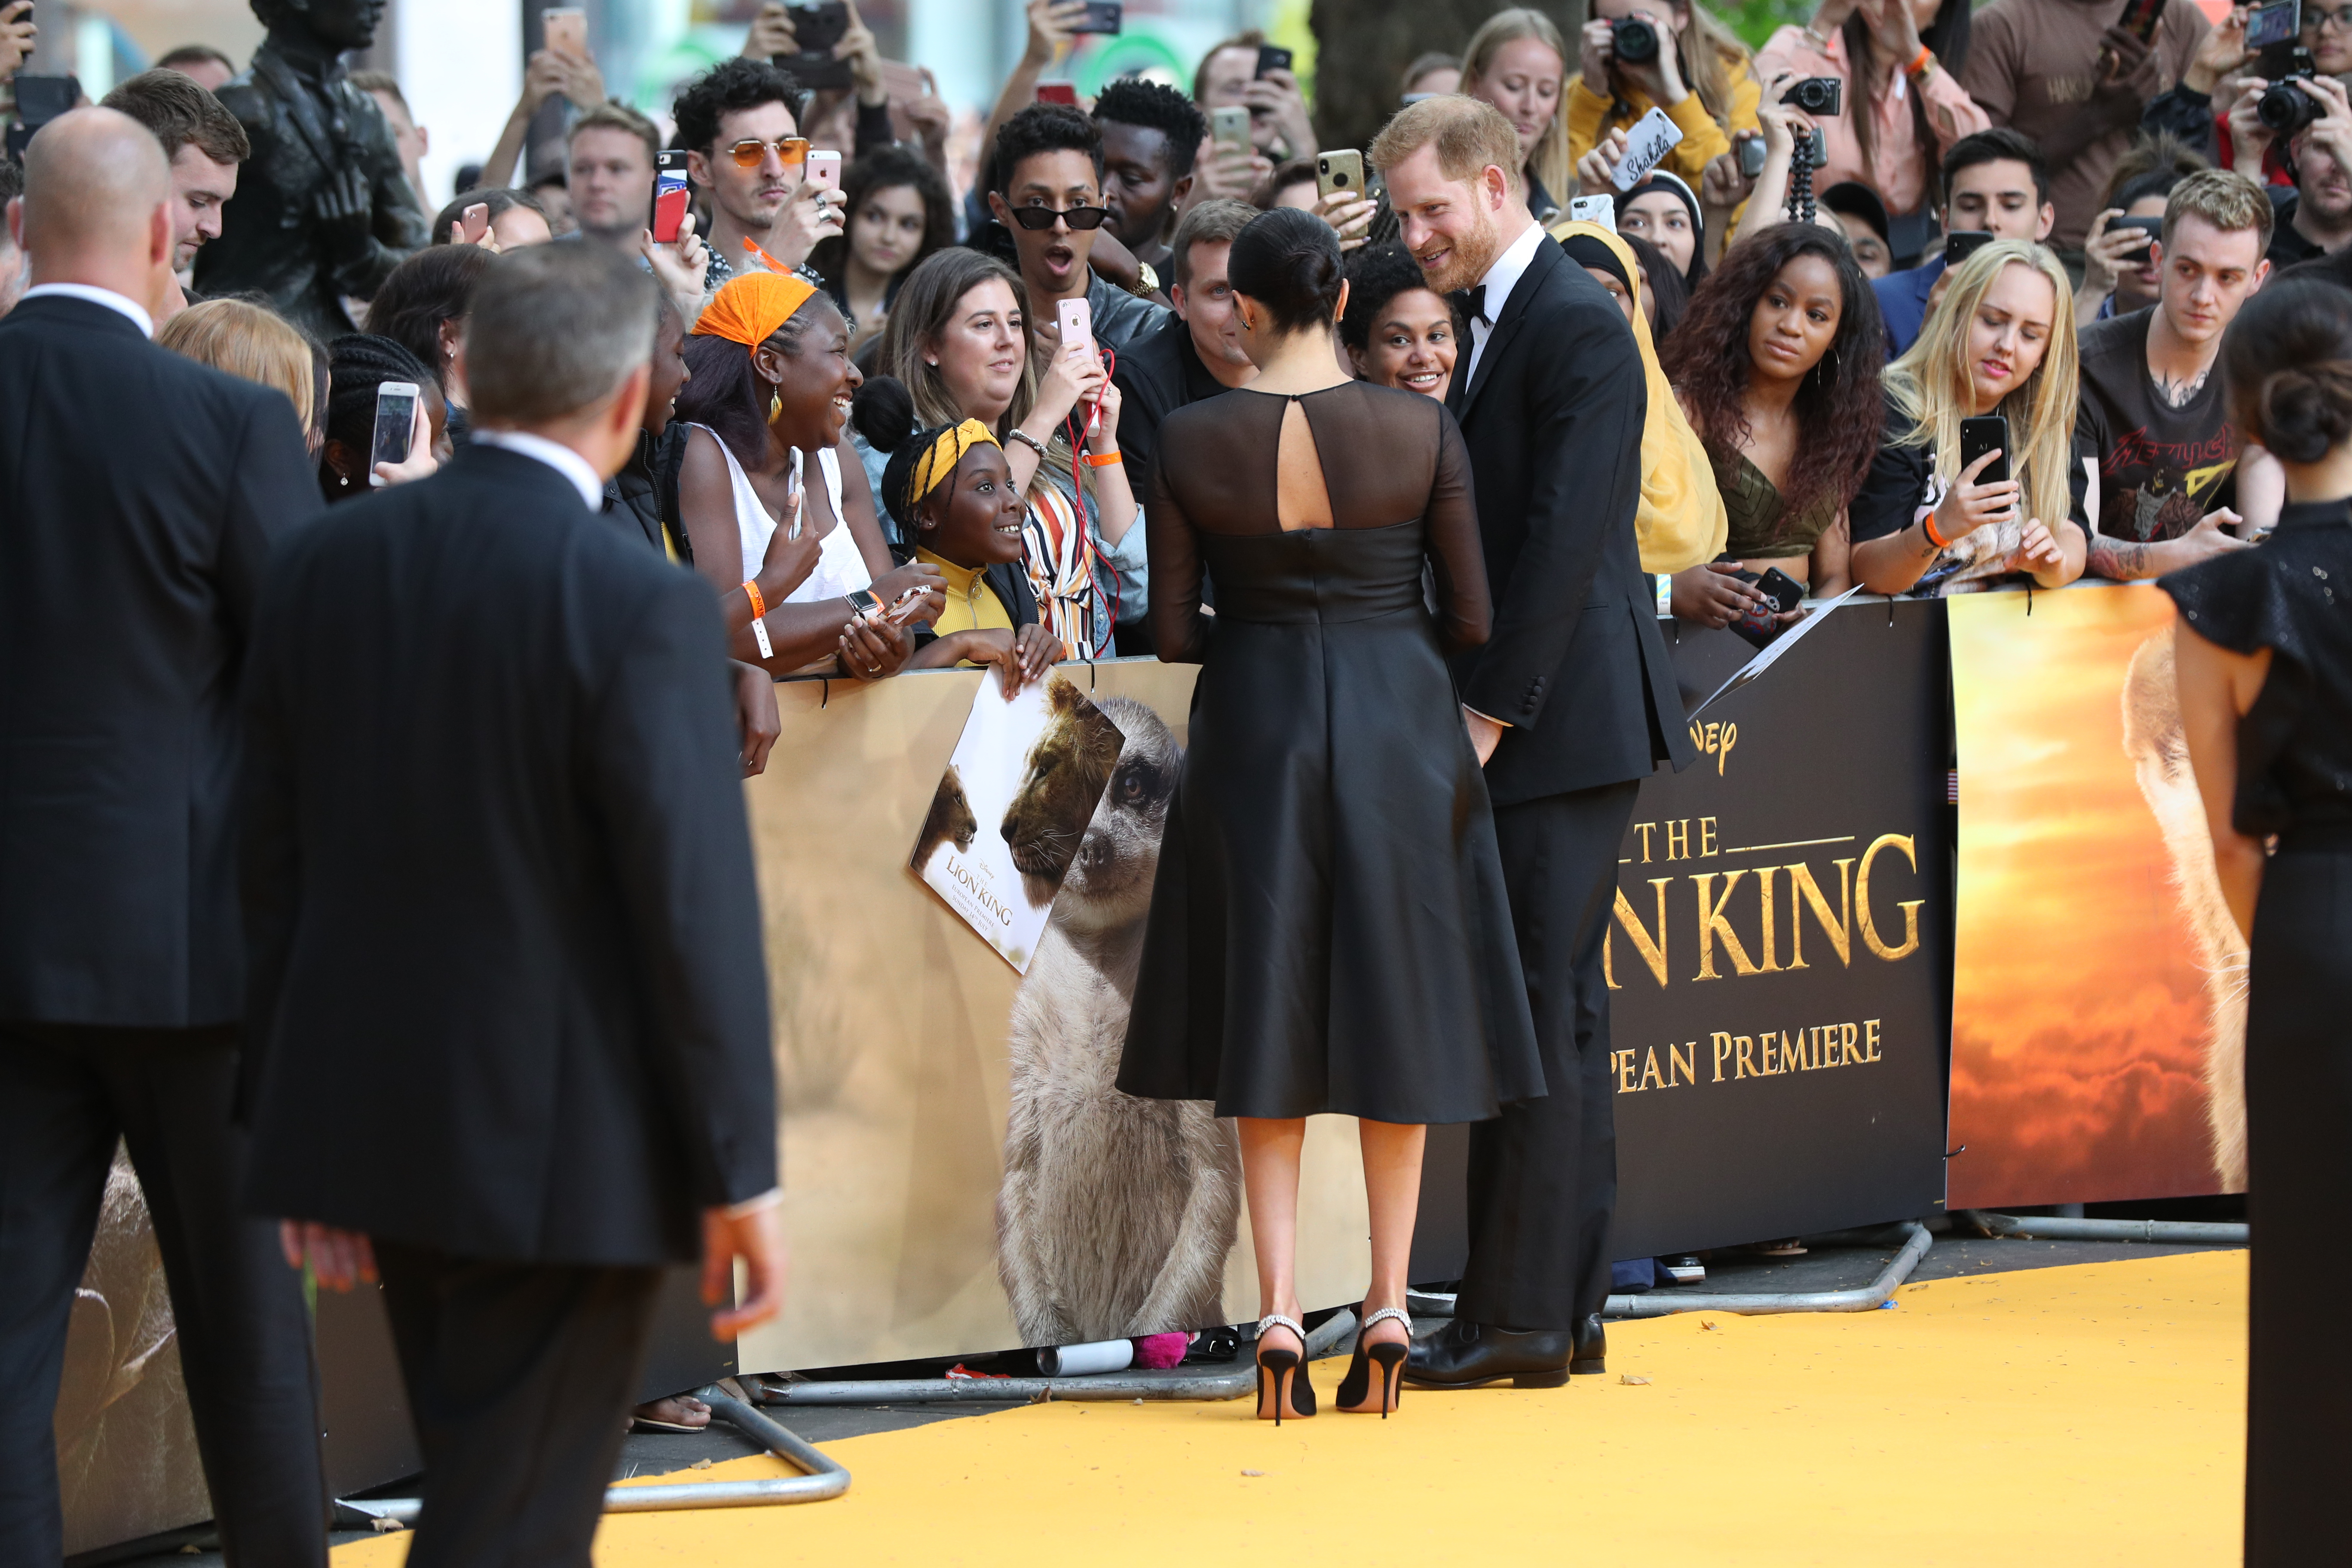 The Duke and Duchess of Sussex attend the European Premiere of Disney's The Lion King at the Odeon Leicester Square, London.